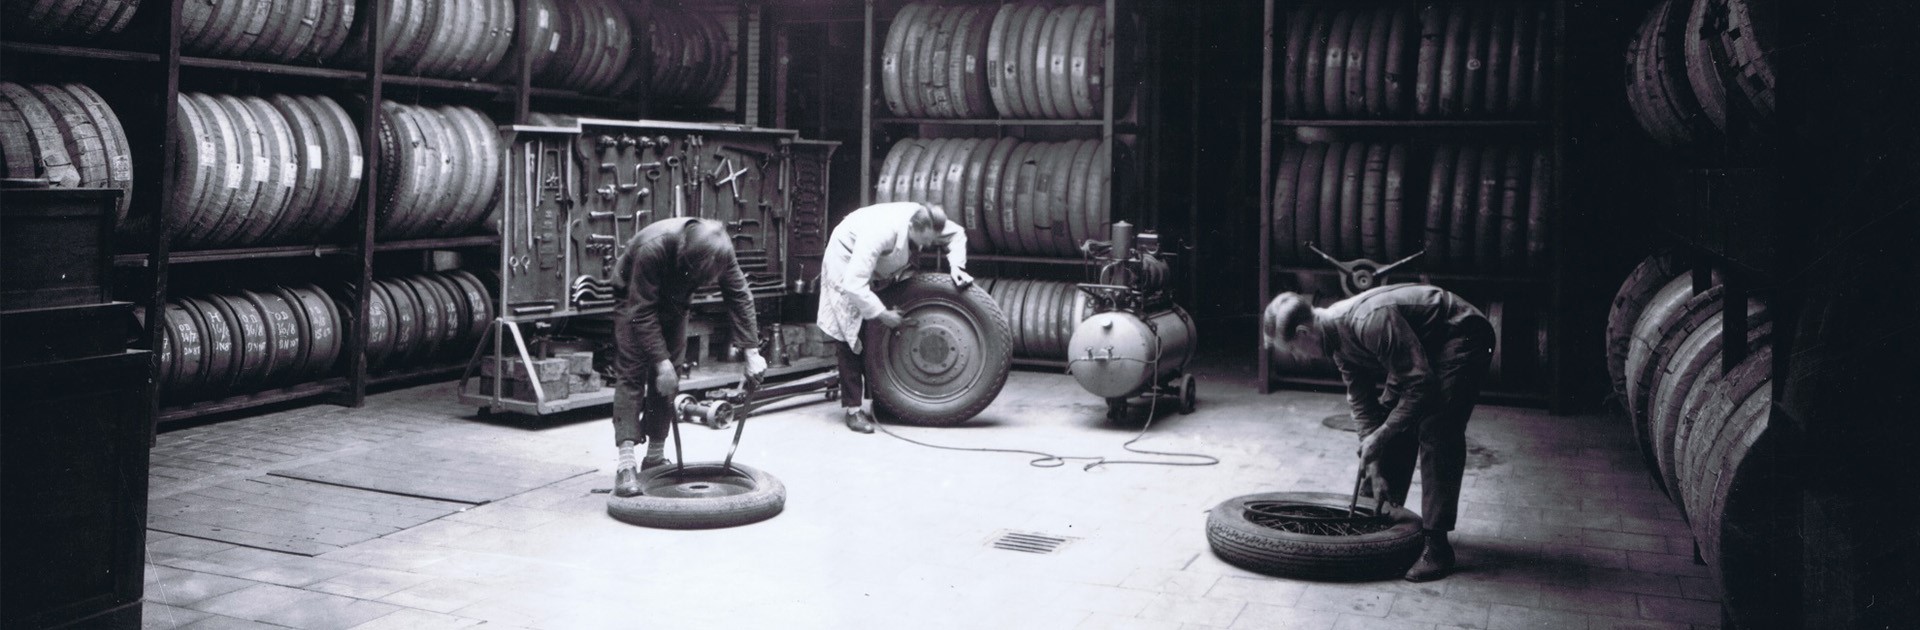 DU QUESNE tyre changers family history